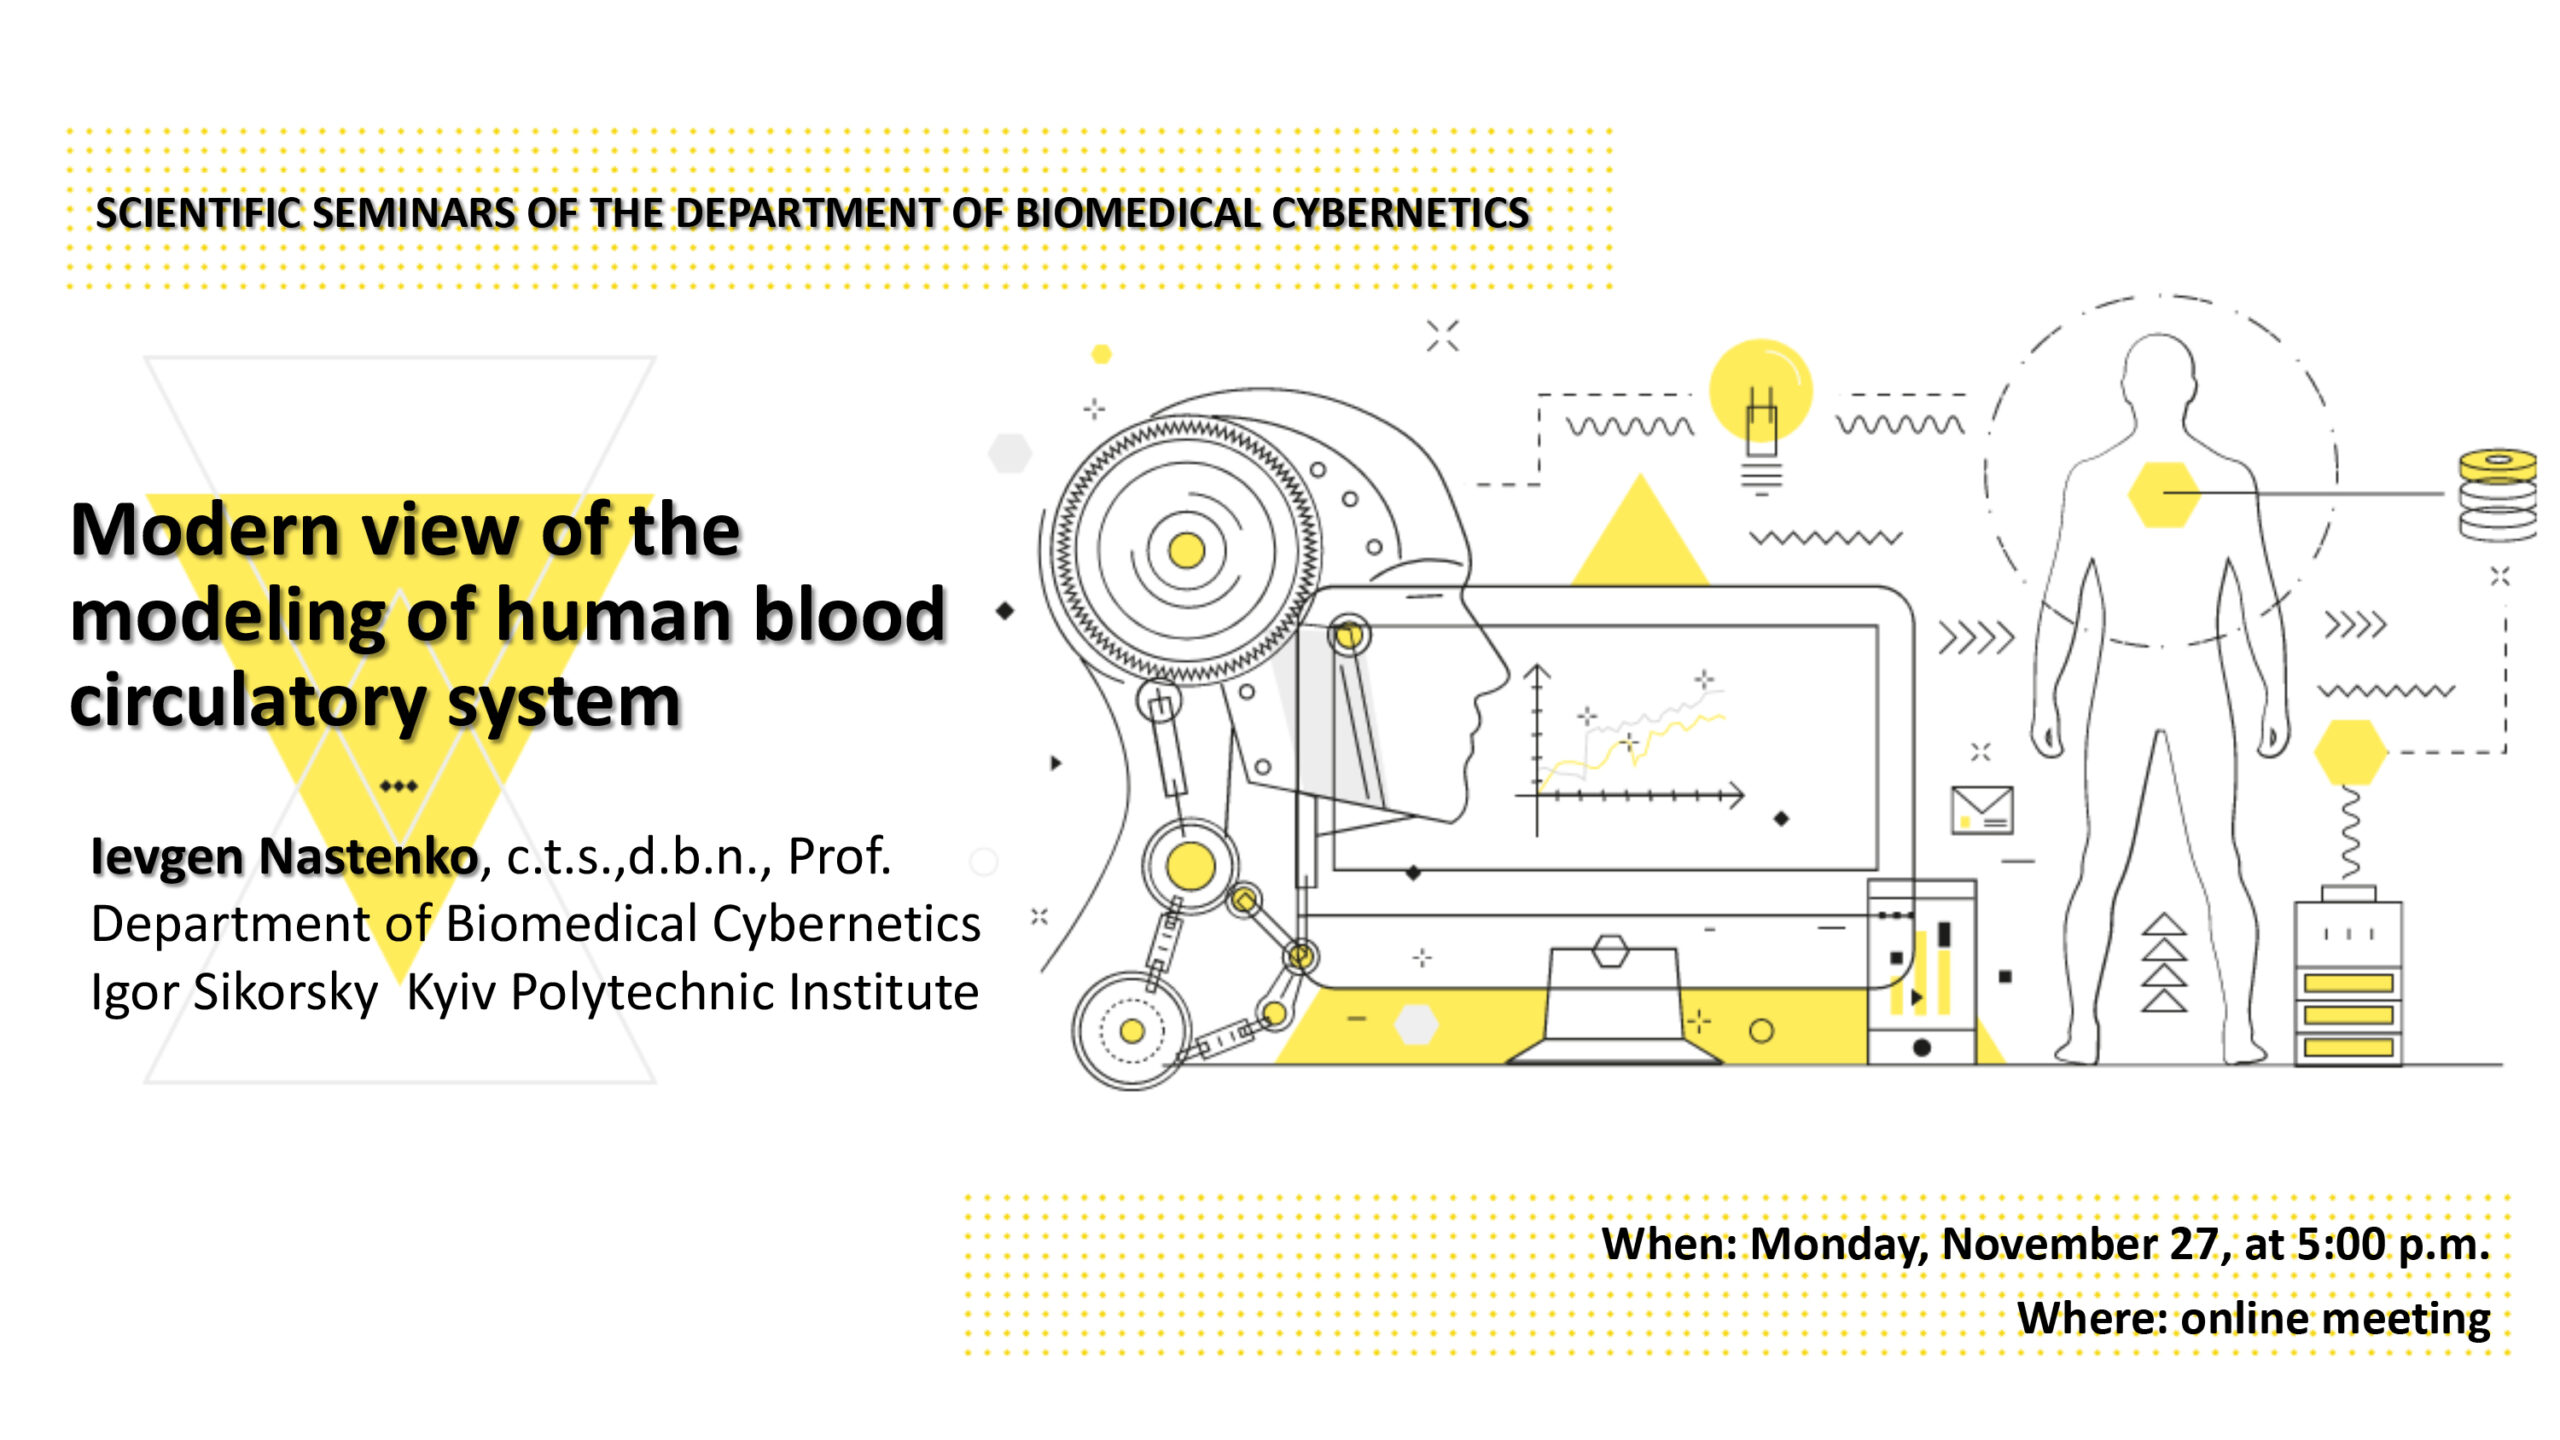 Modern view of the modeling of human blood circulatory system